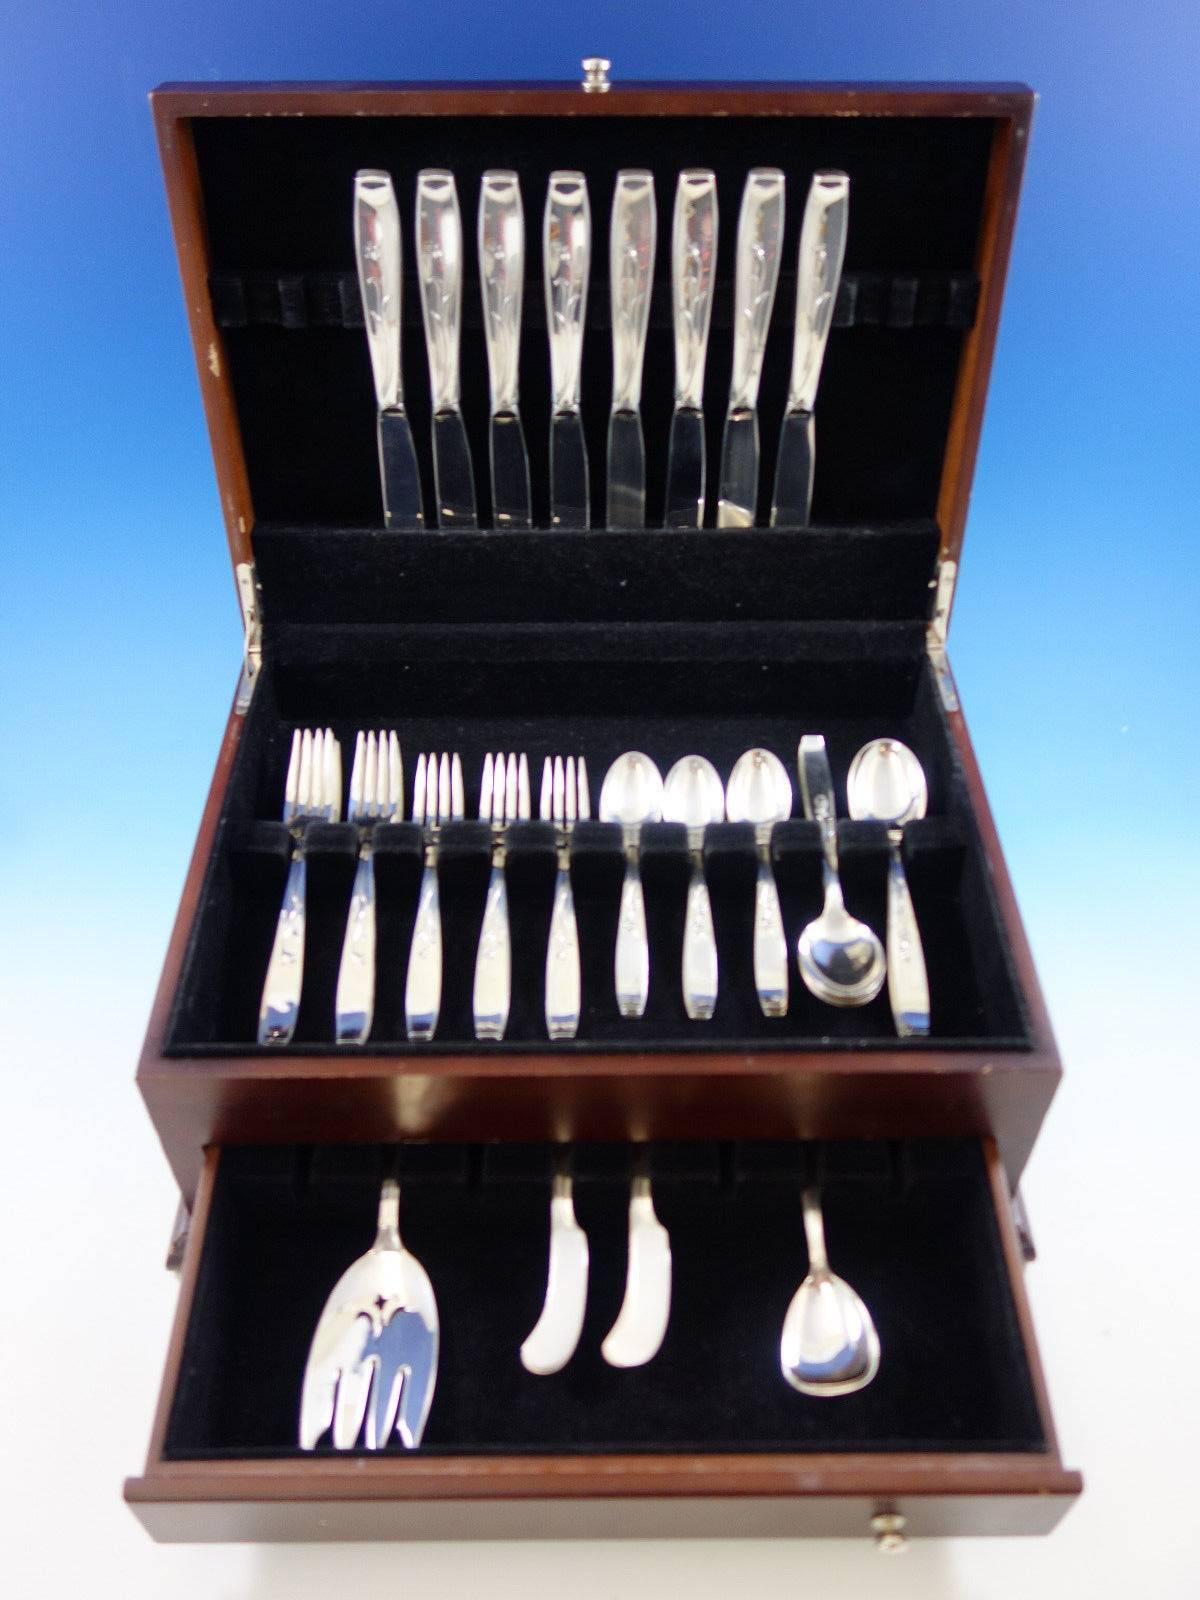 Mayfair by Frank Smith Sterling Silver Flatware set - 50 pieces. This set includes: 

8 Knives, 9 1/4